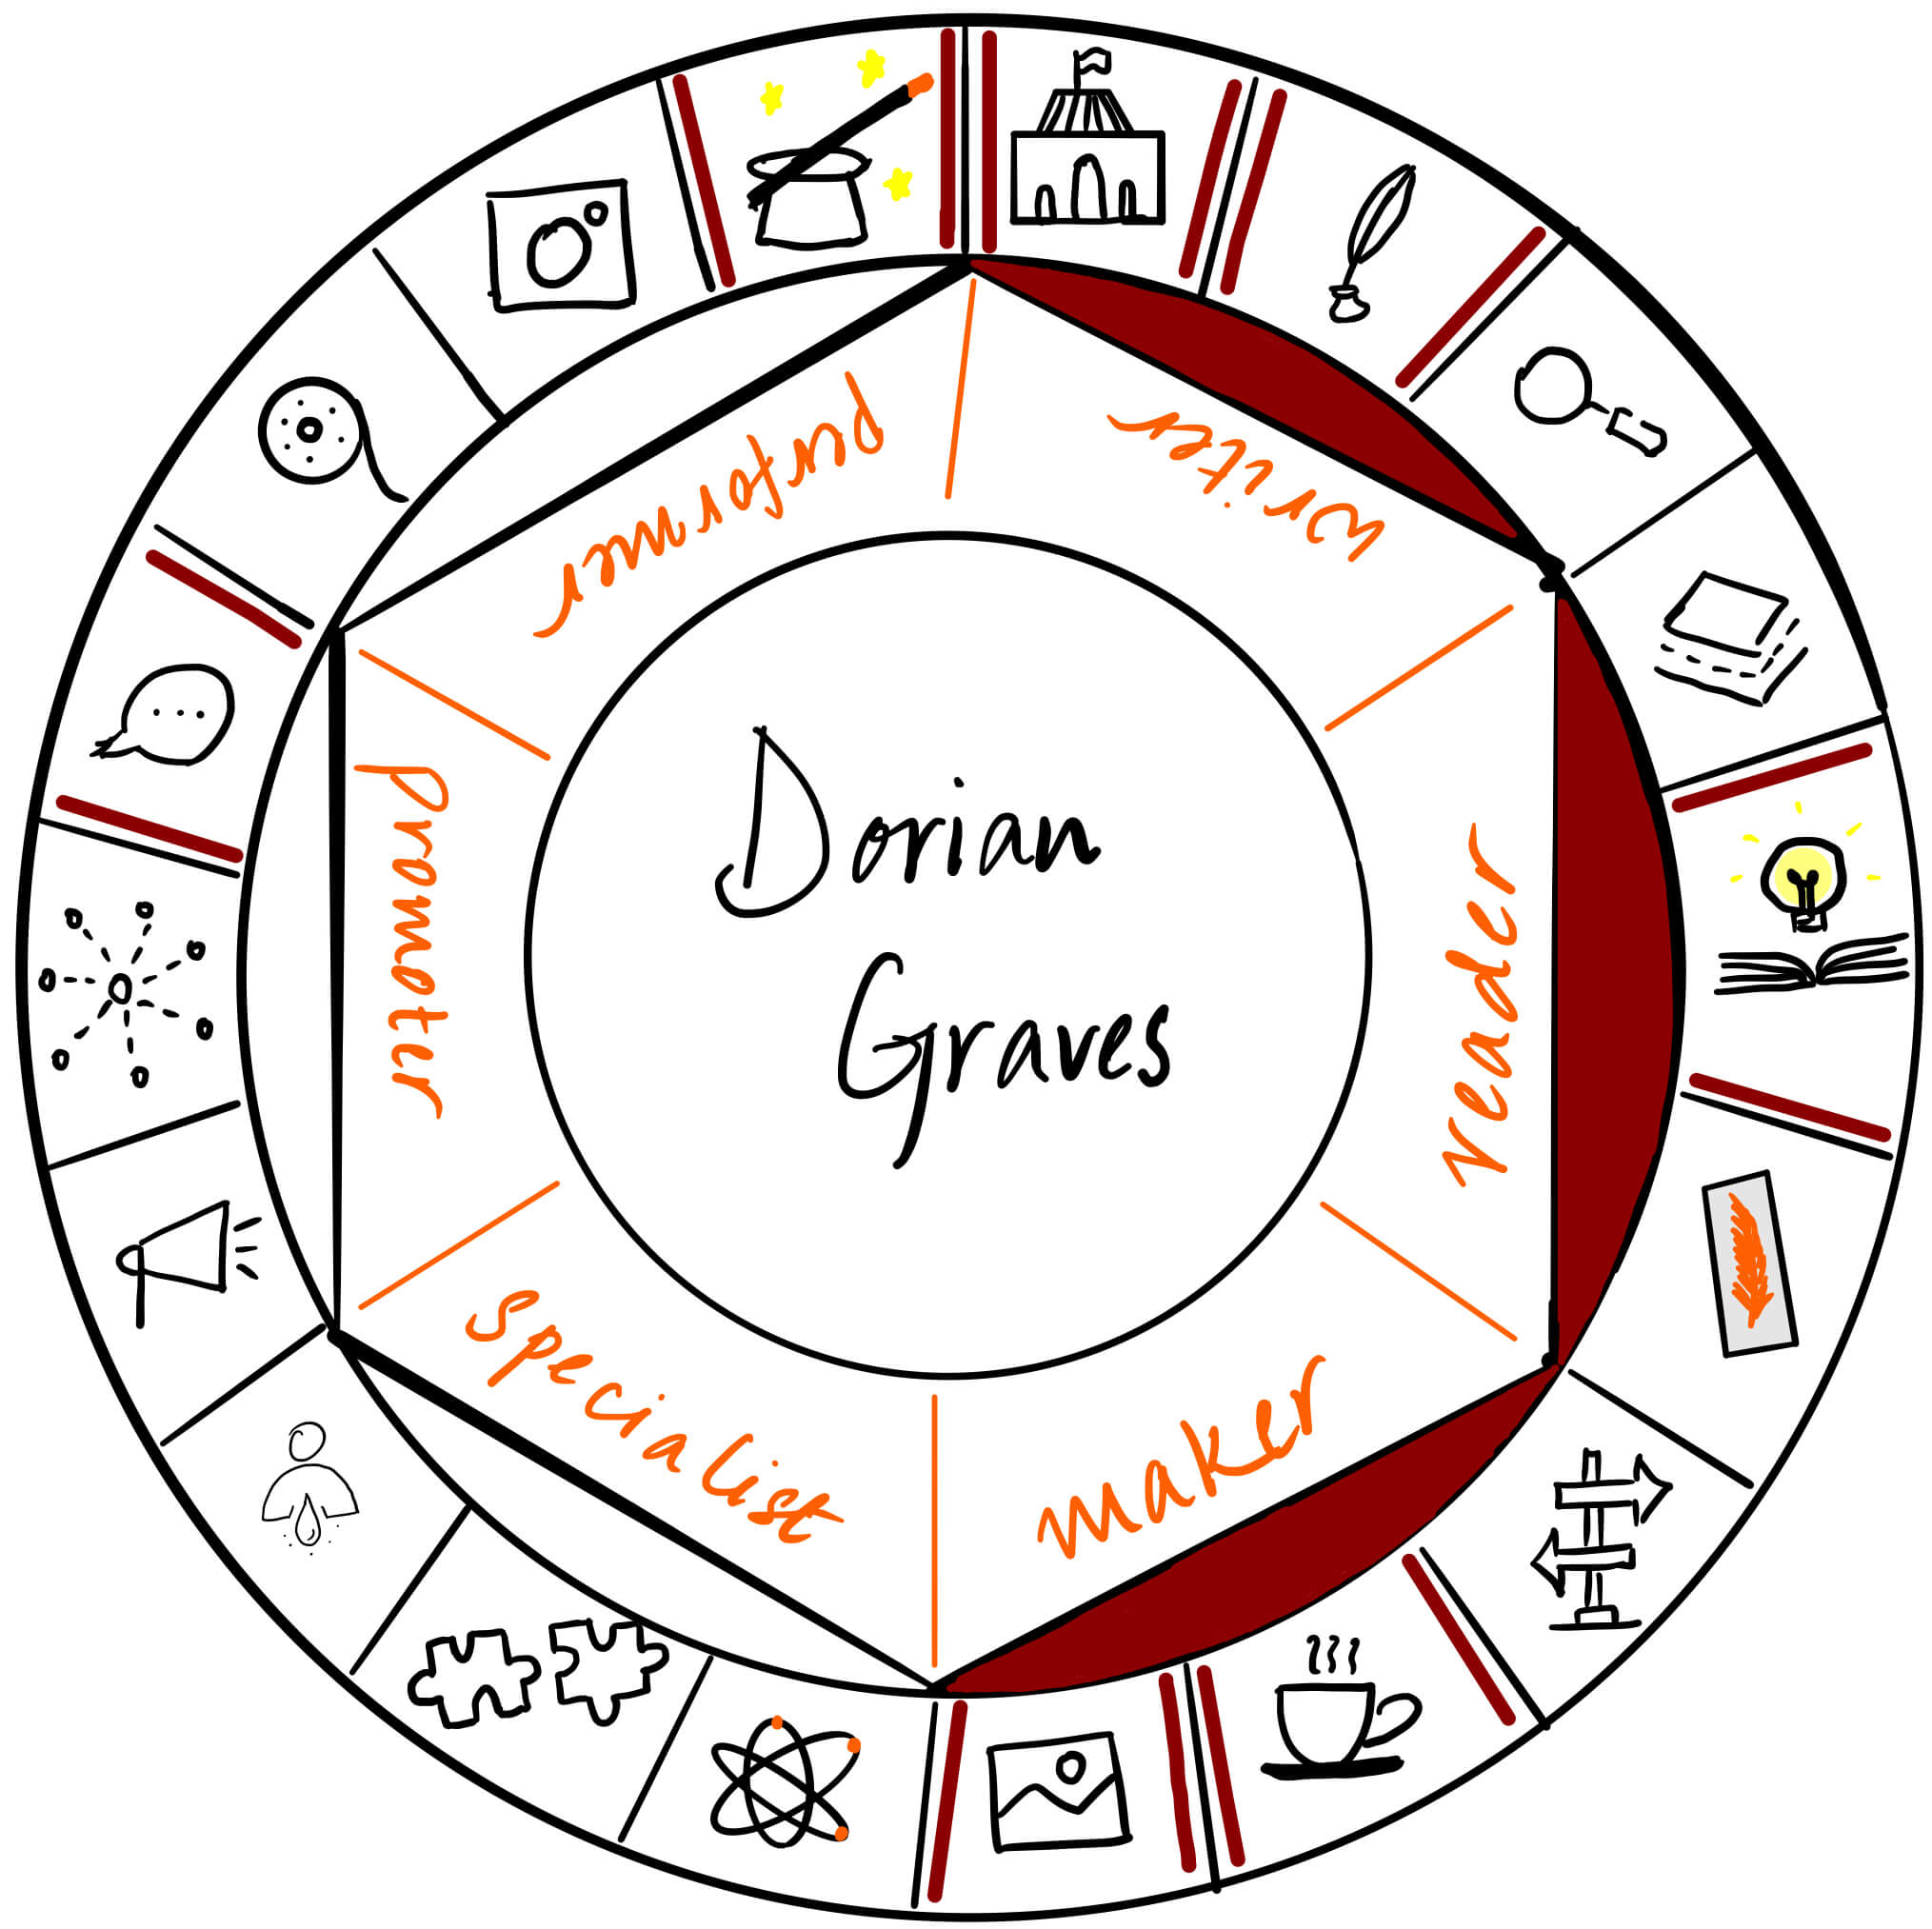 Dorian Graves is a writer, reader and maker. On The Creator's Roulette, Dorian is sharing about how to make a monster and the research that goes into it.